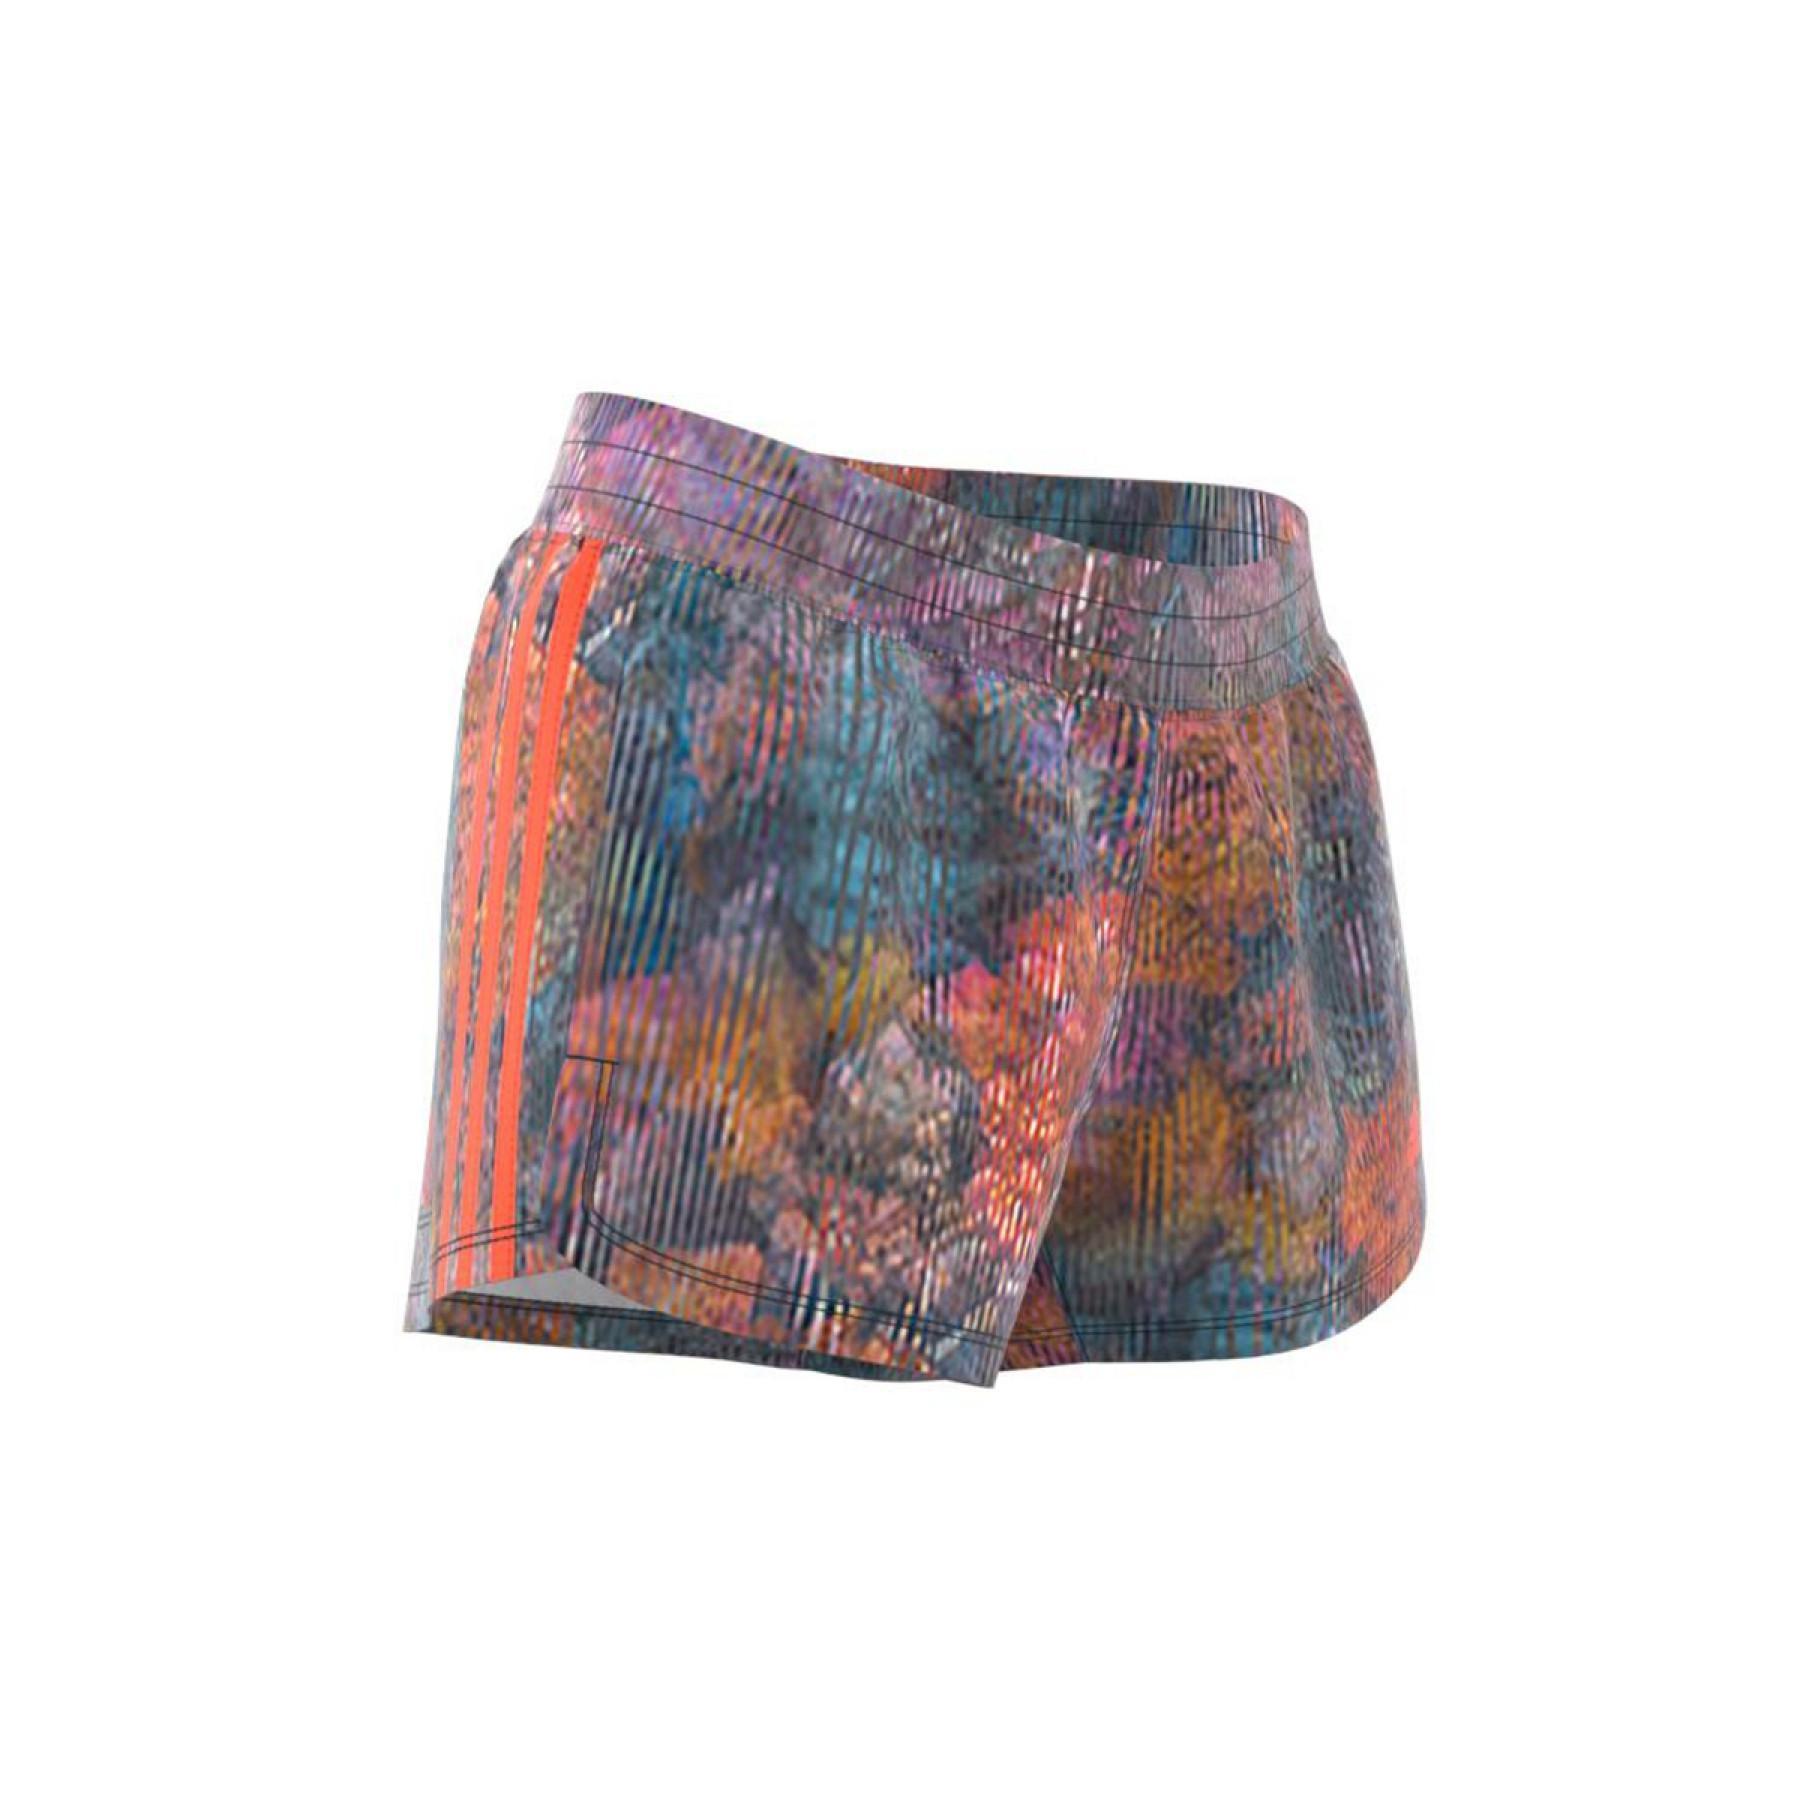 Women's shorts adidas 3S Woven Pacer Floral